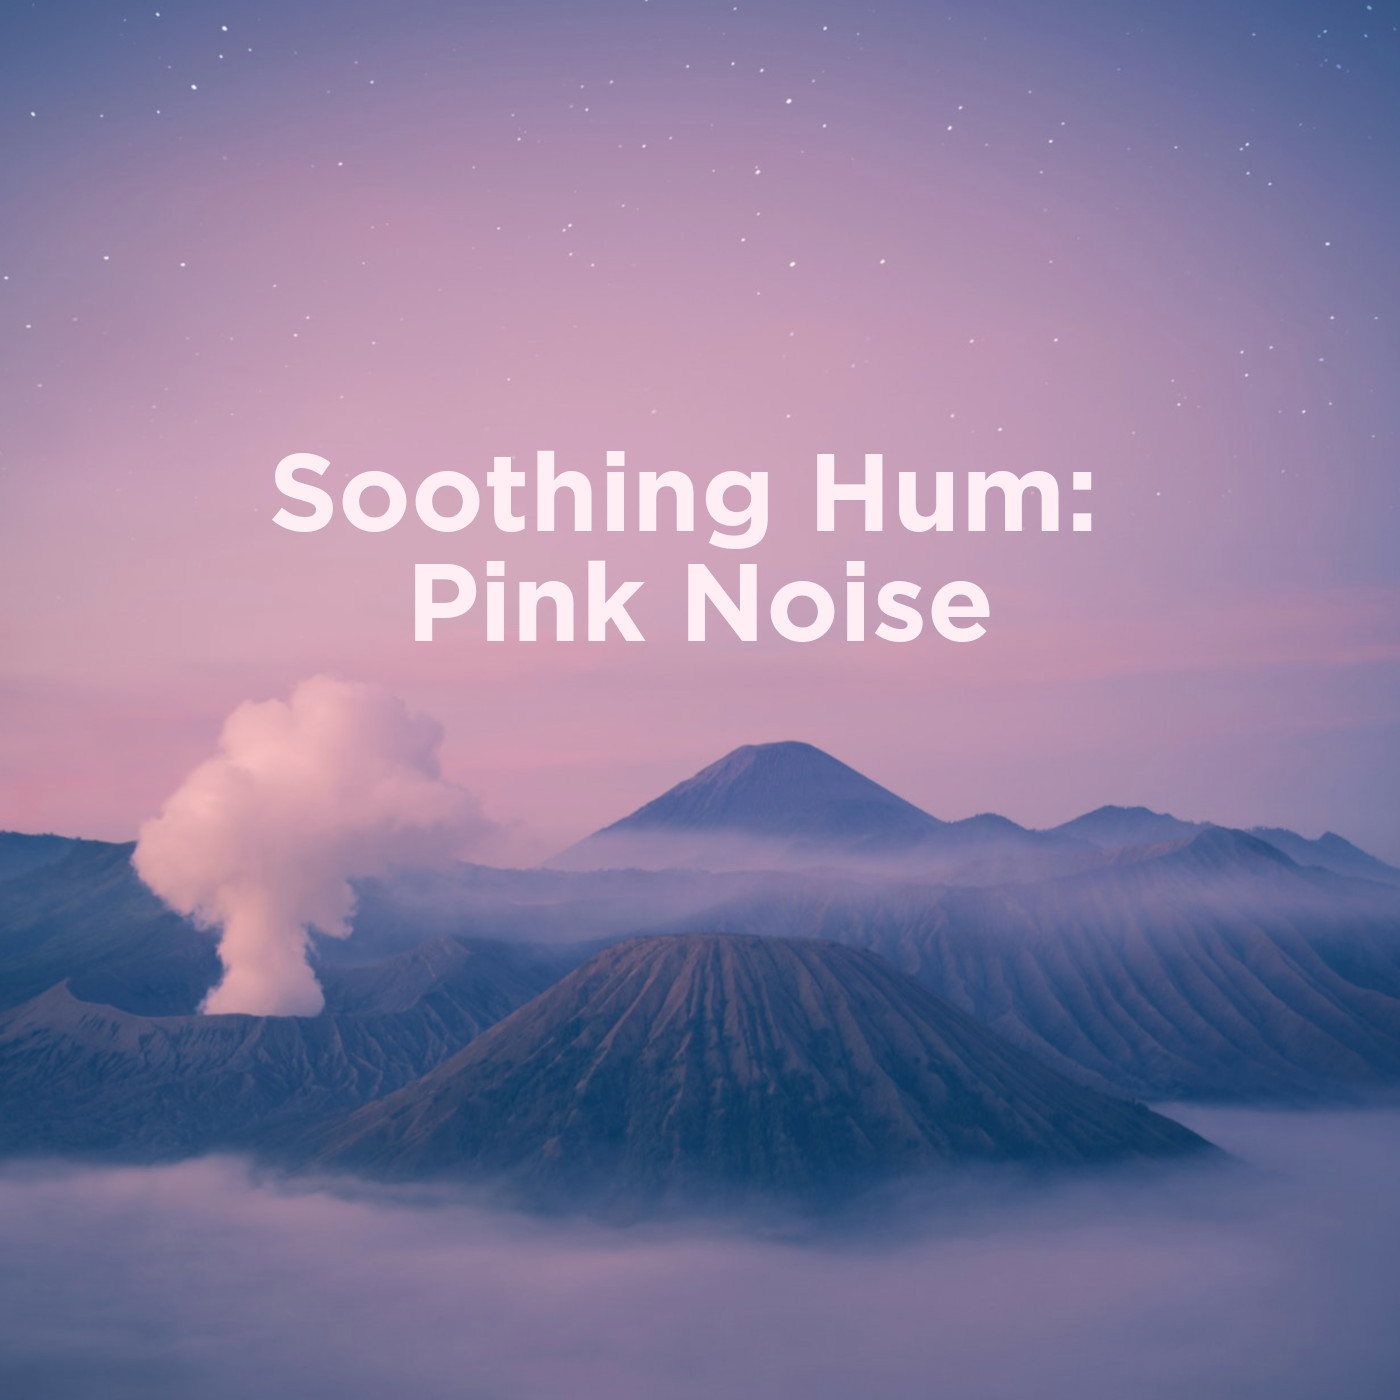 Soothing Hum: Pink Noise